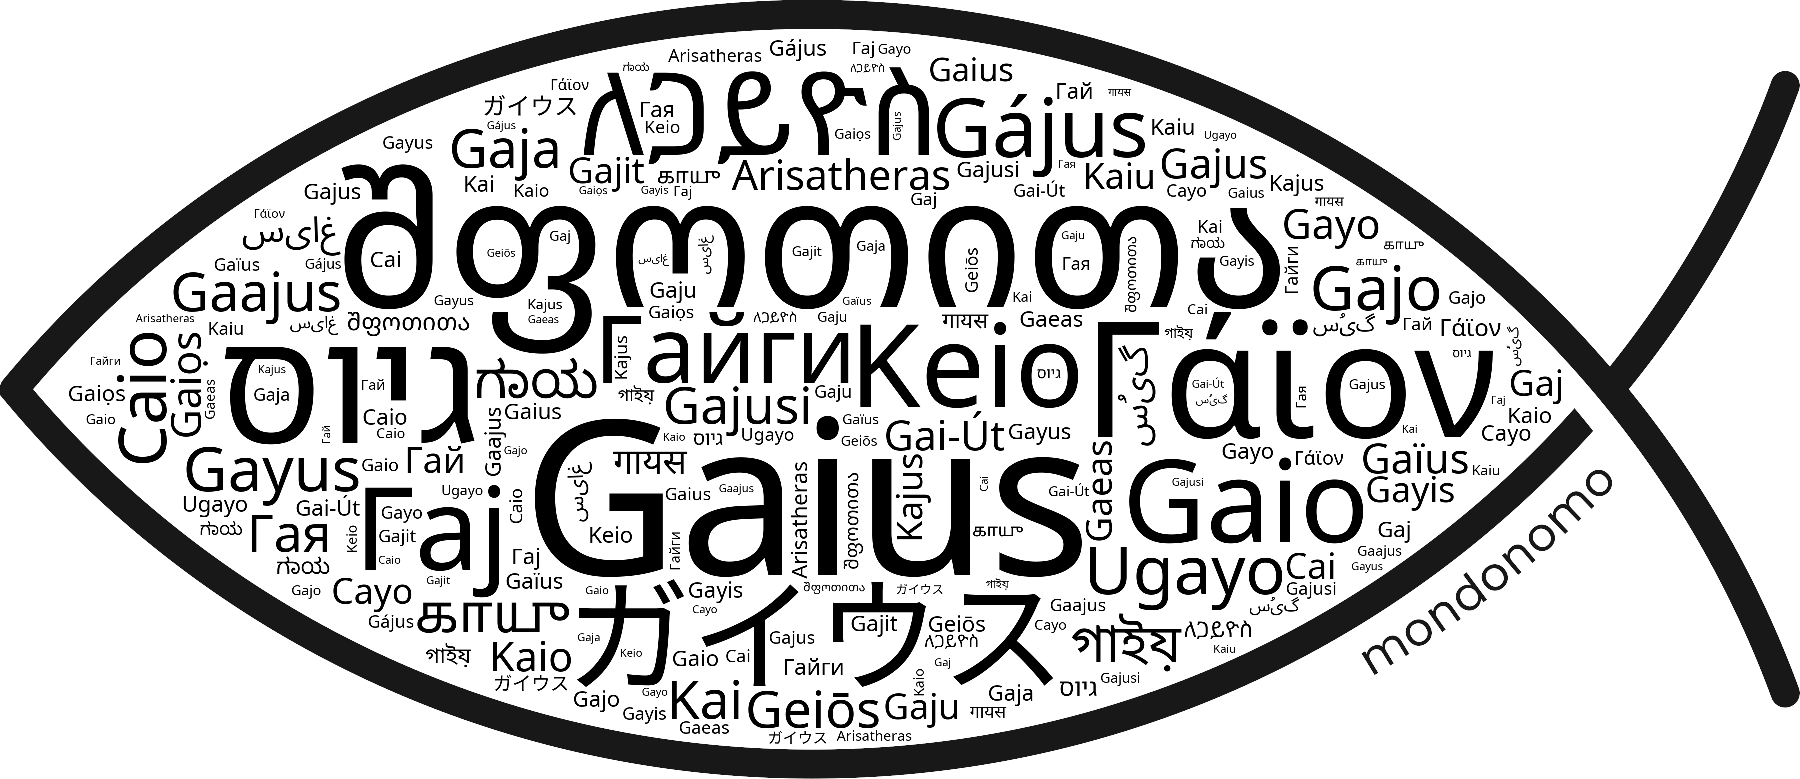 Name Gaius in the world's Bibles